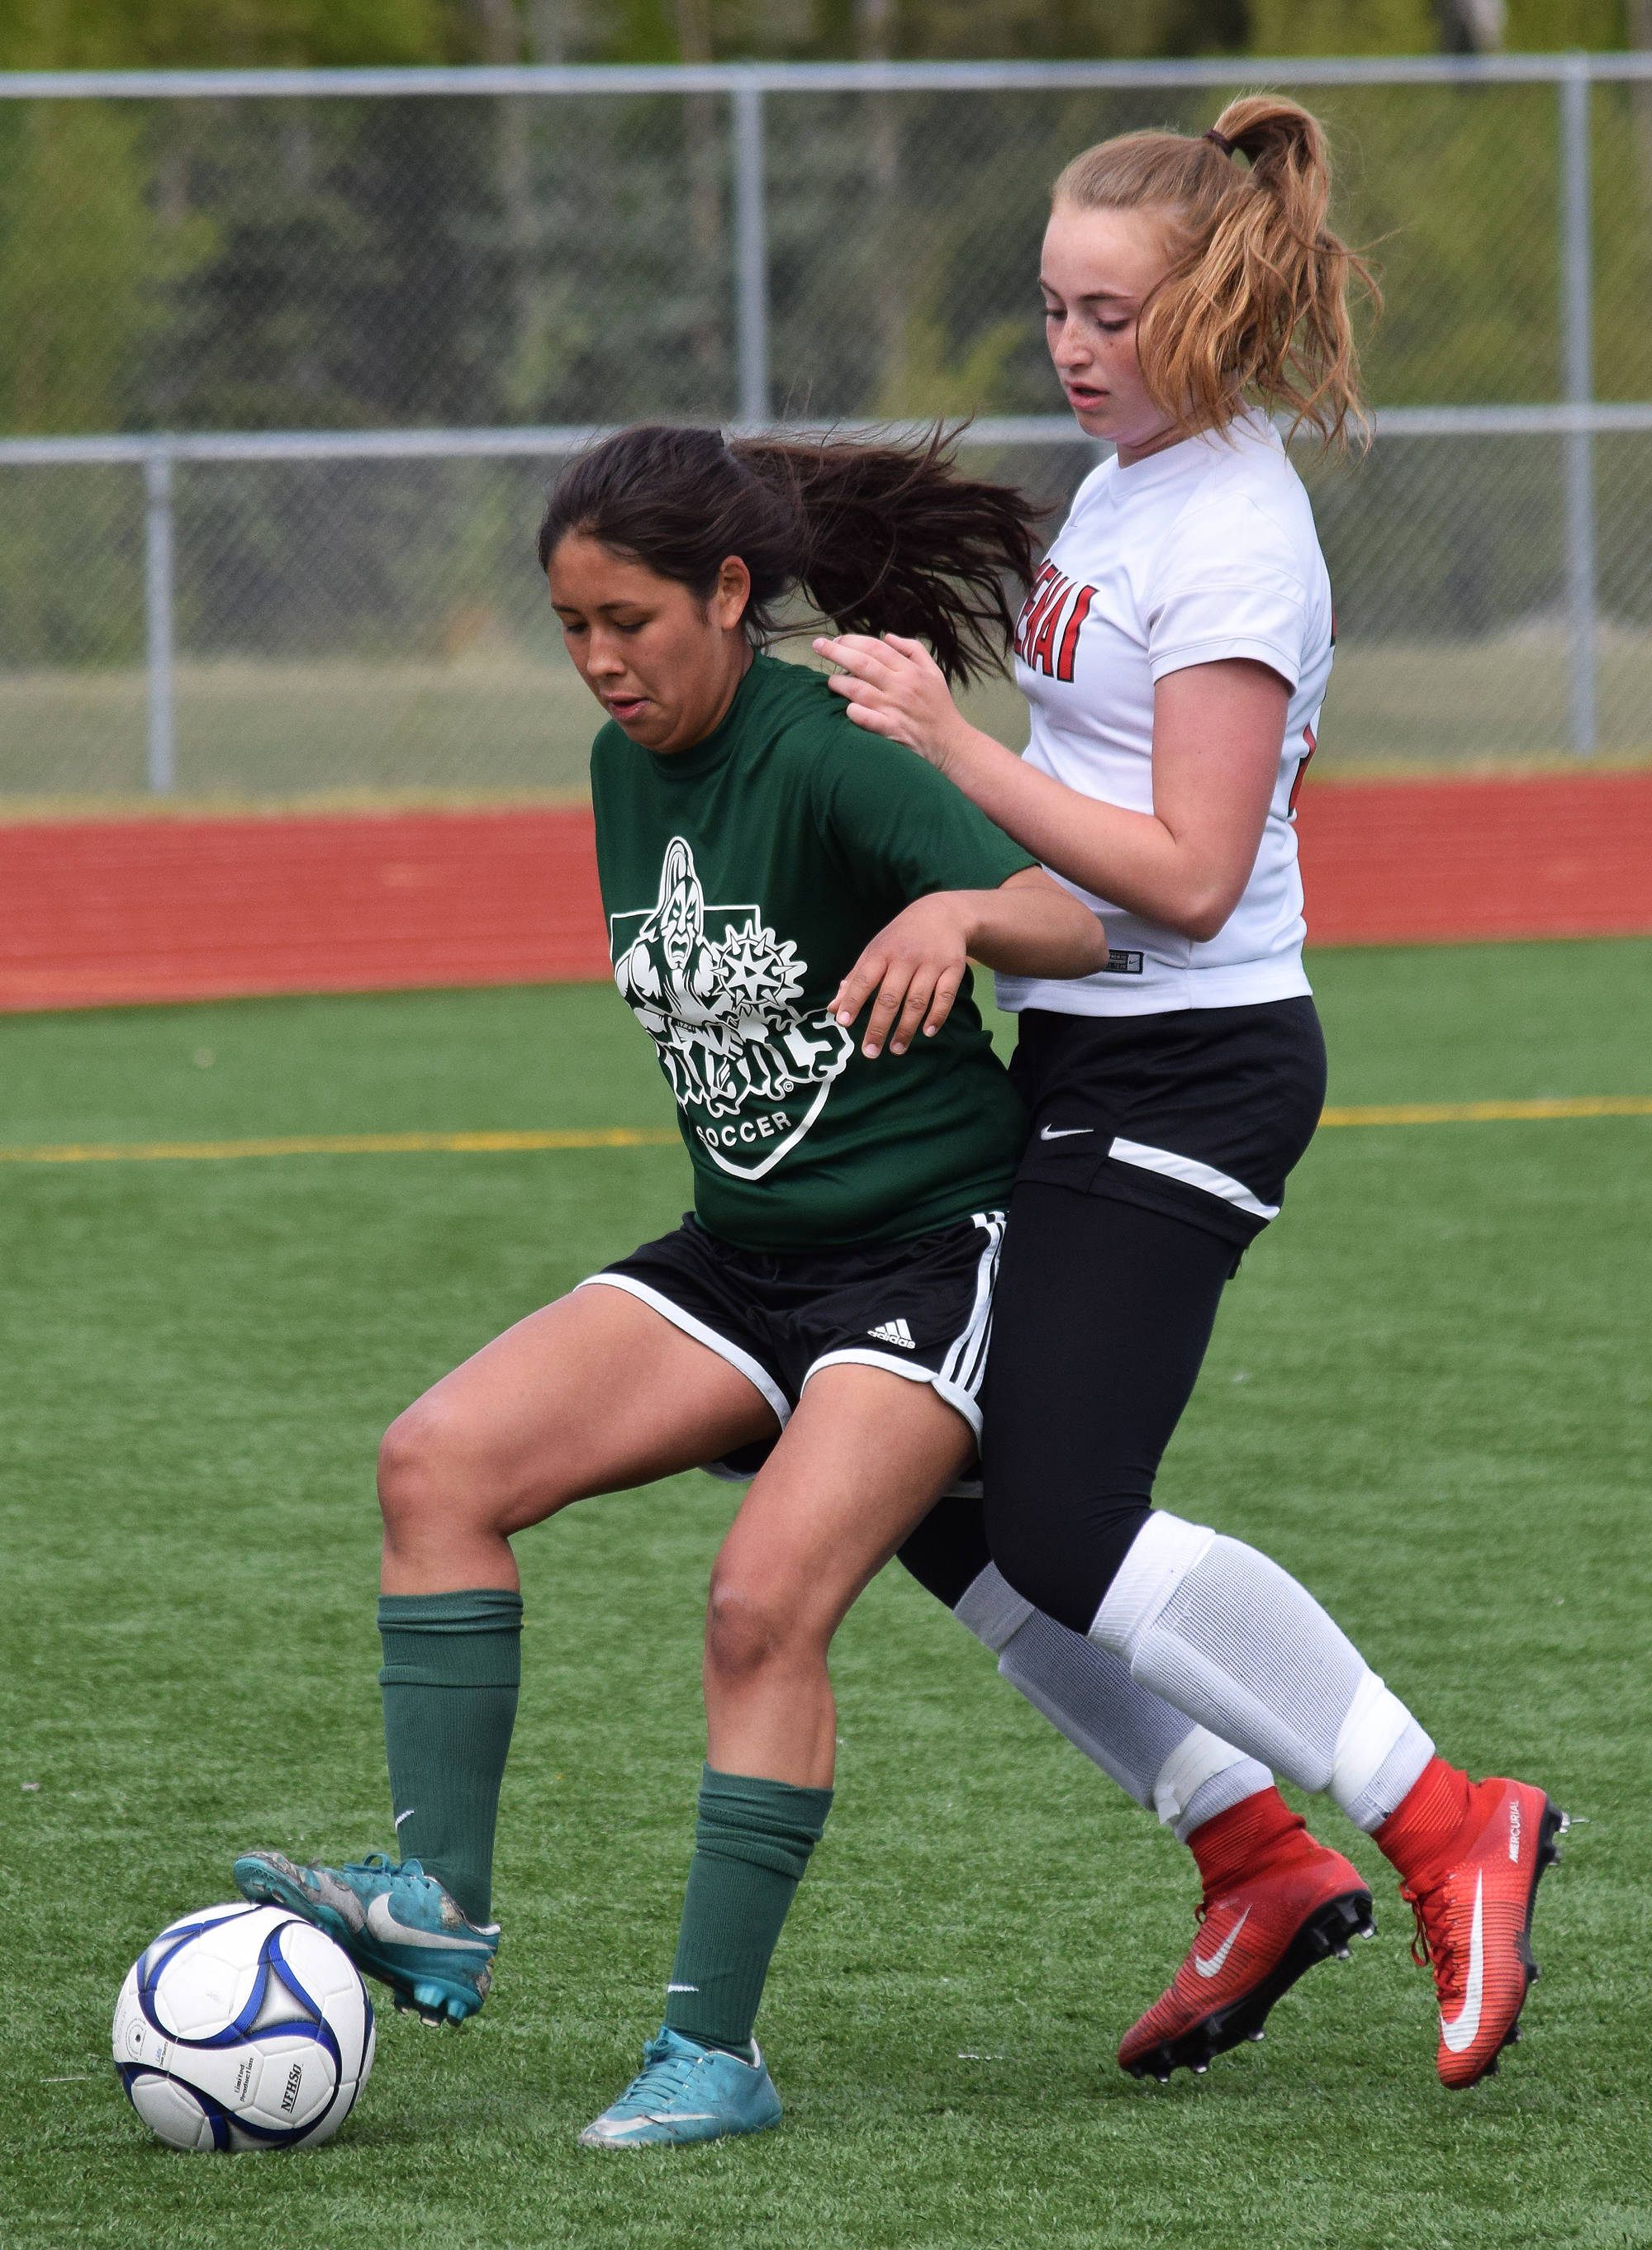 Colony’s Kira Fagerstrom (left) battles for possession against Kenai Central’s Liz Hanson in a consolation semifinal Friday at the girls state soccer tournament at Eagle River High School. (Photo by Joey Klecka/Peninsula Clarion)